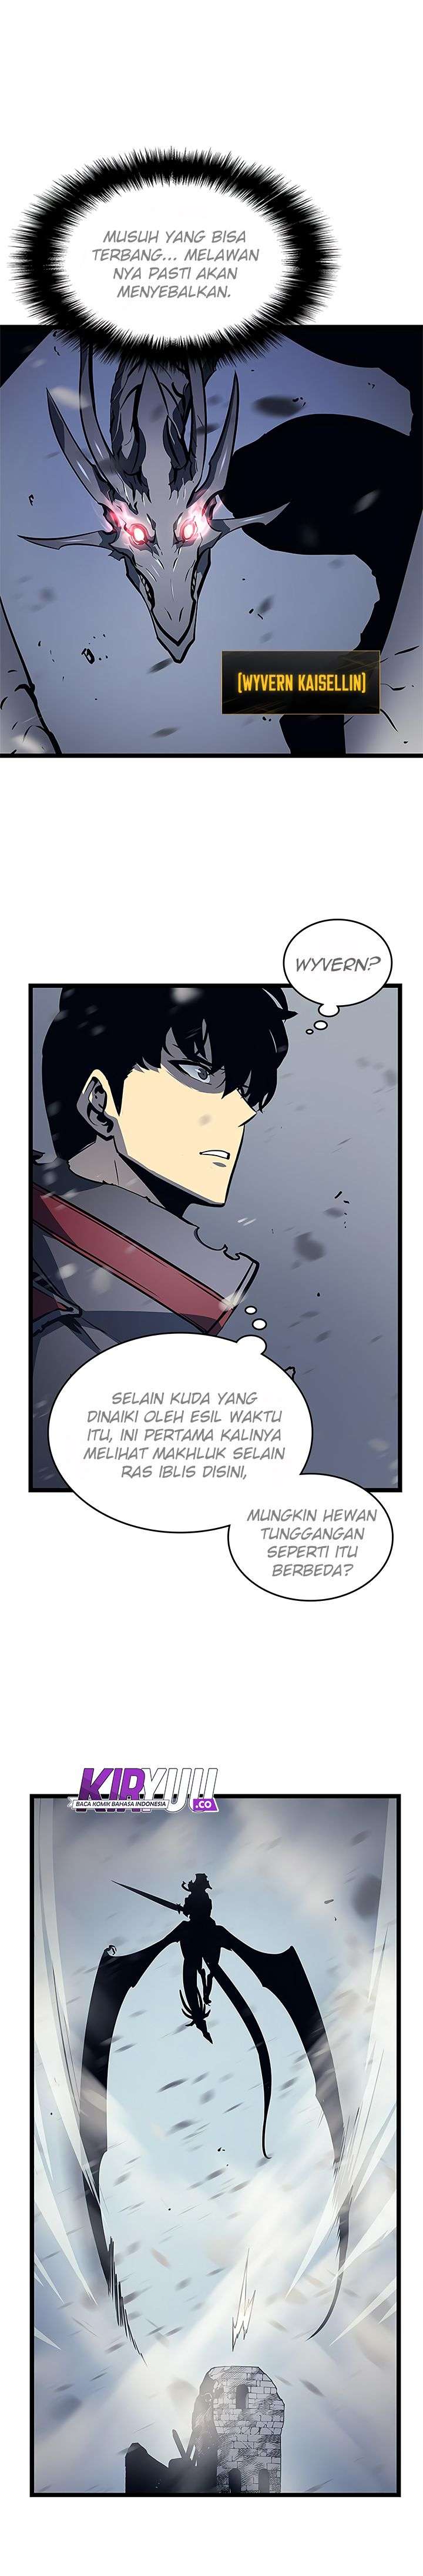 Solo Leveling Chapter 86 Image 4